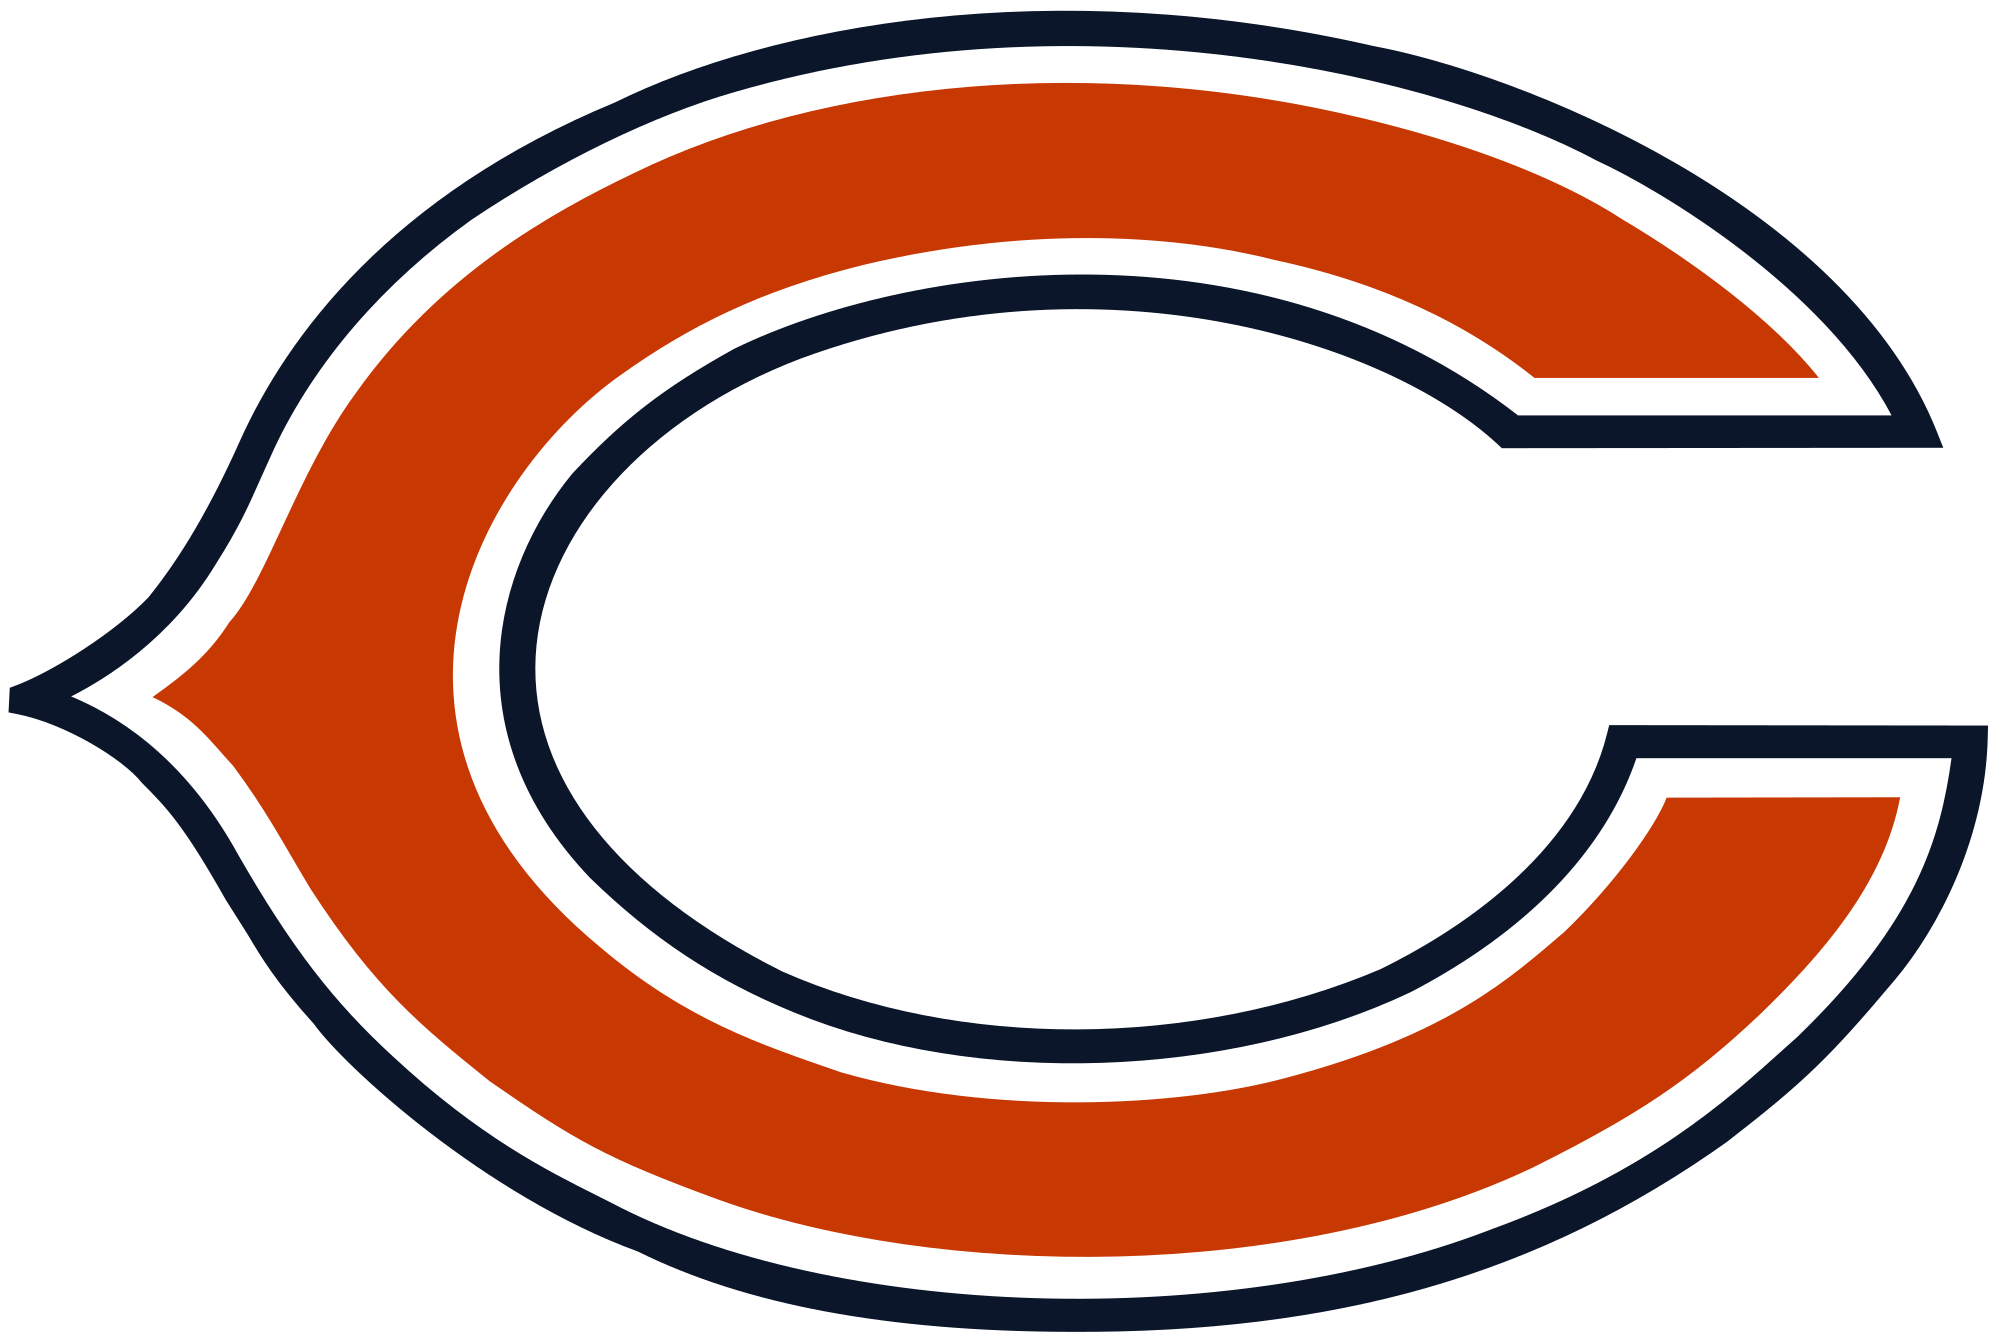 2000px-Chicago_Bears_logo.svg.png